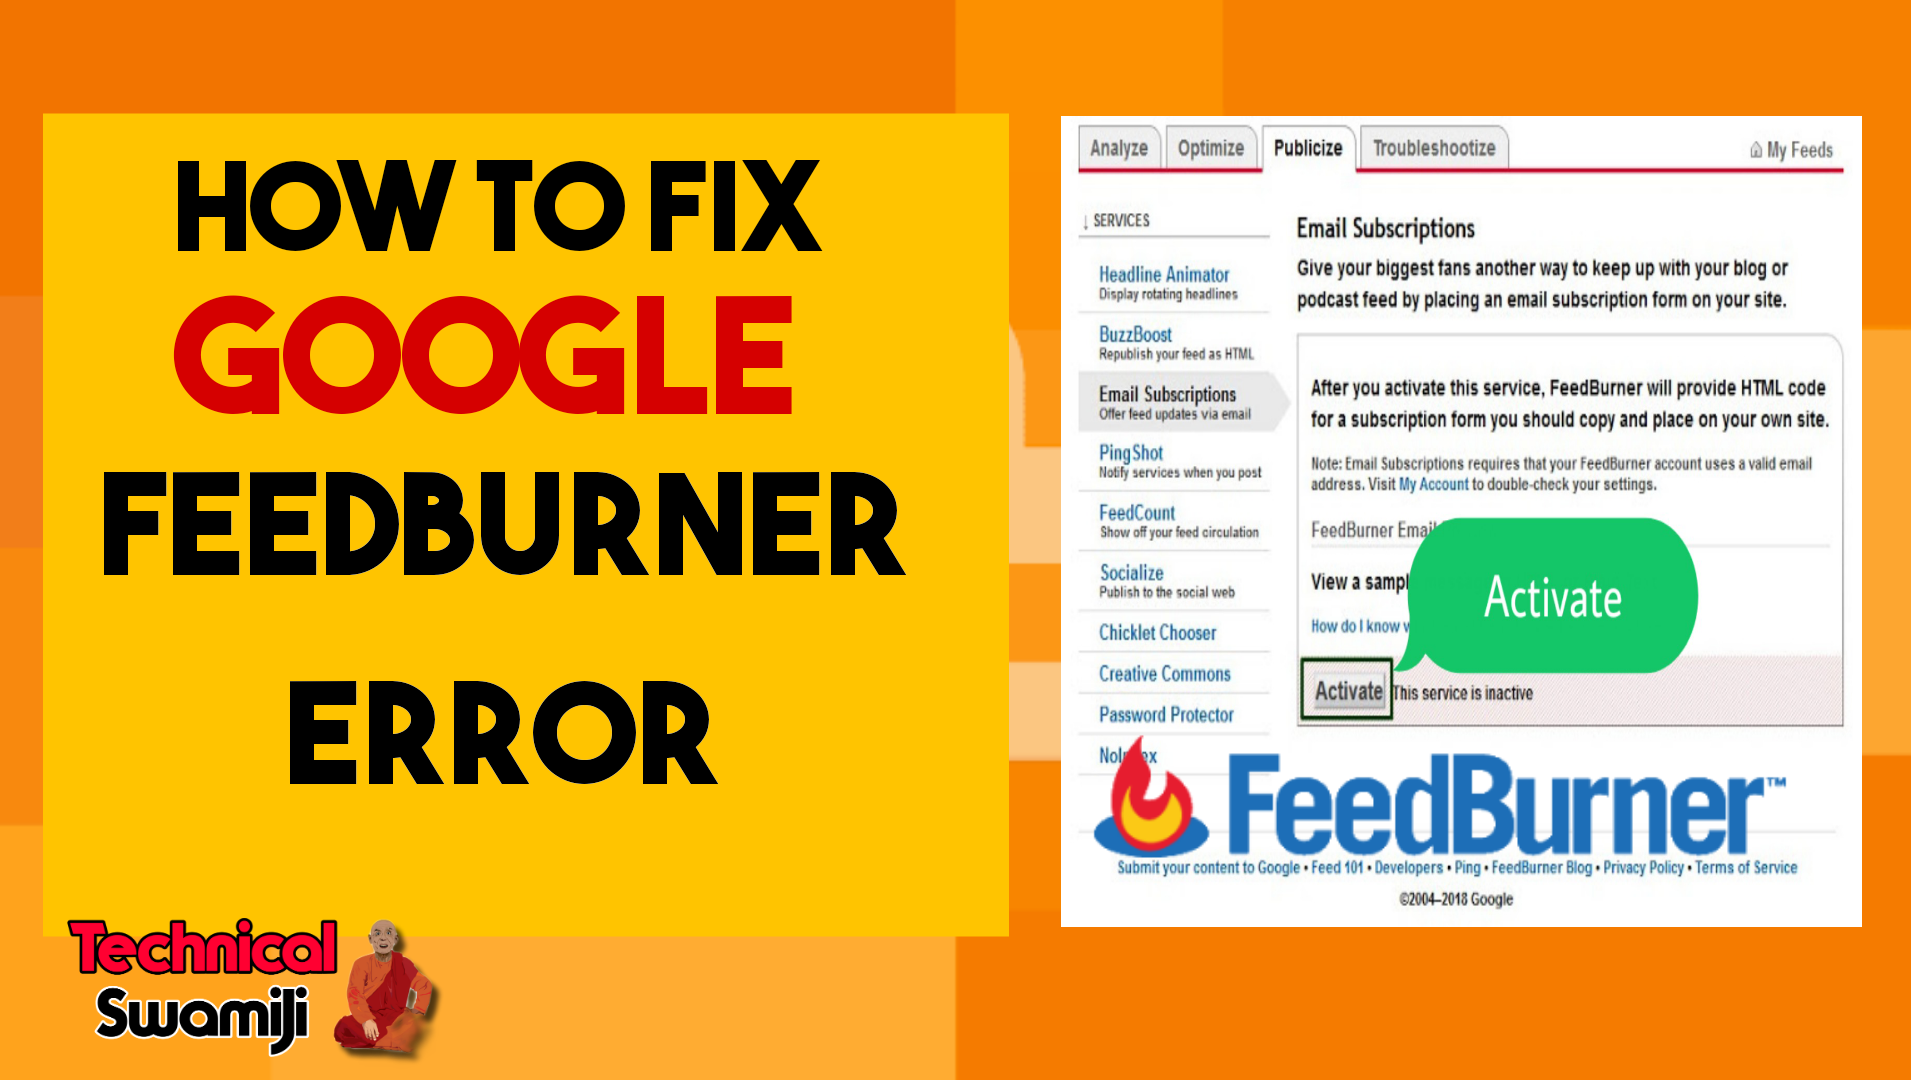 Google Feedburner: The Feed Doesn't Have Subscriptions by Email